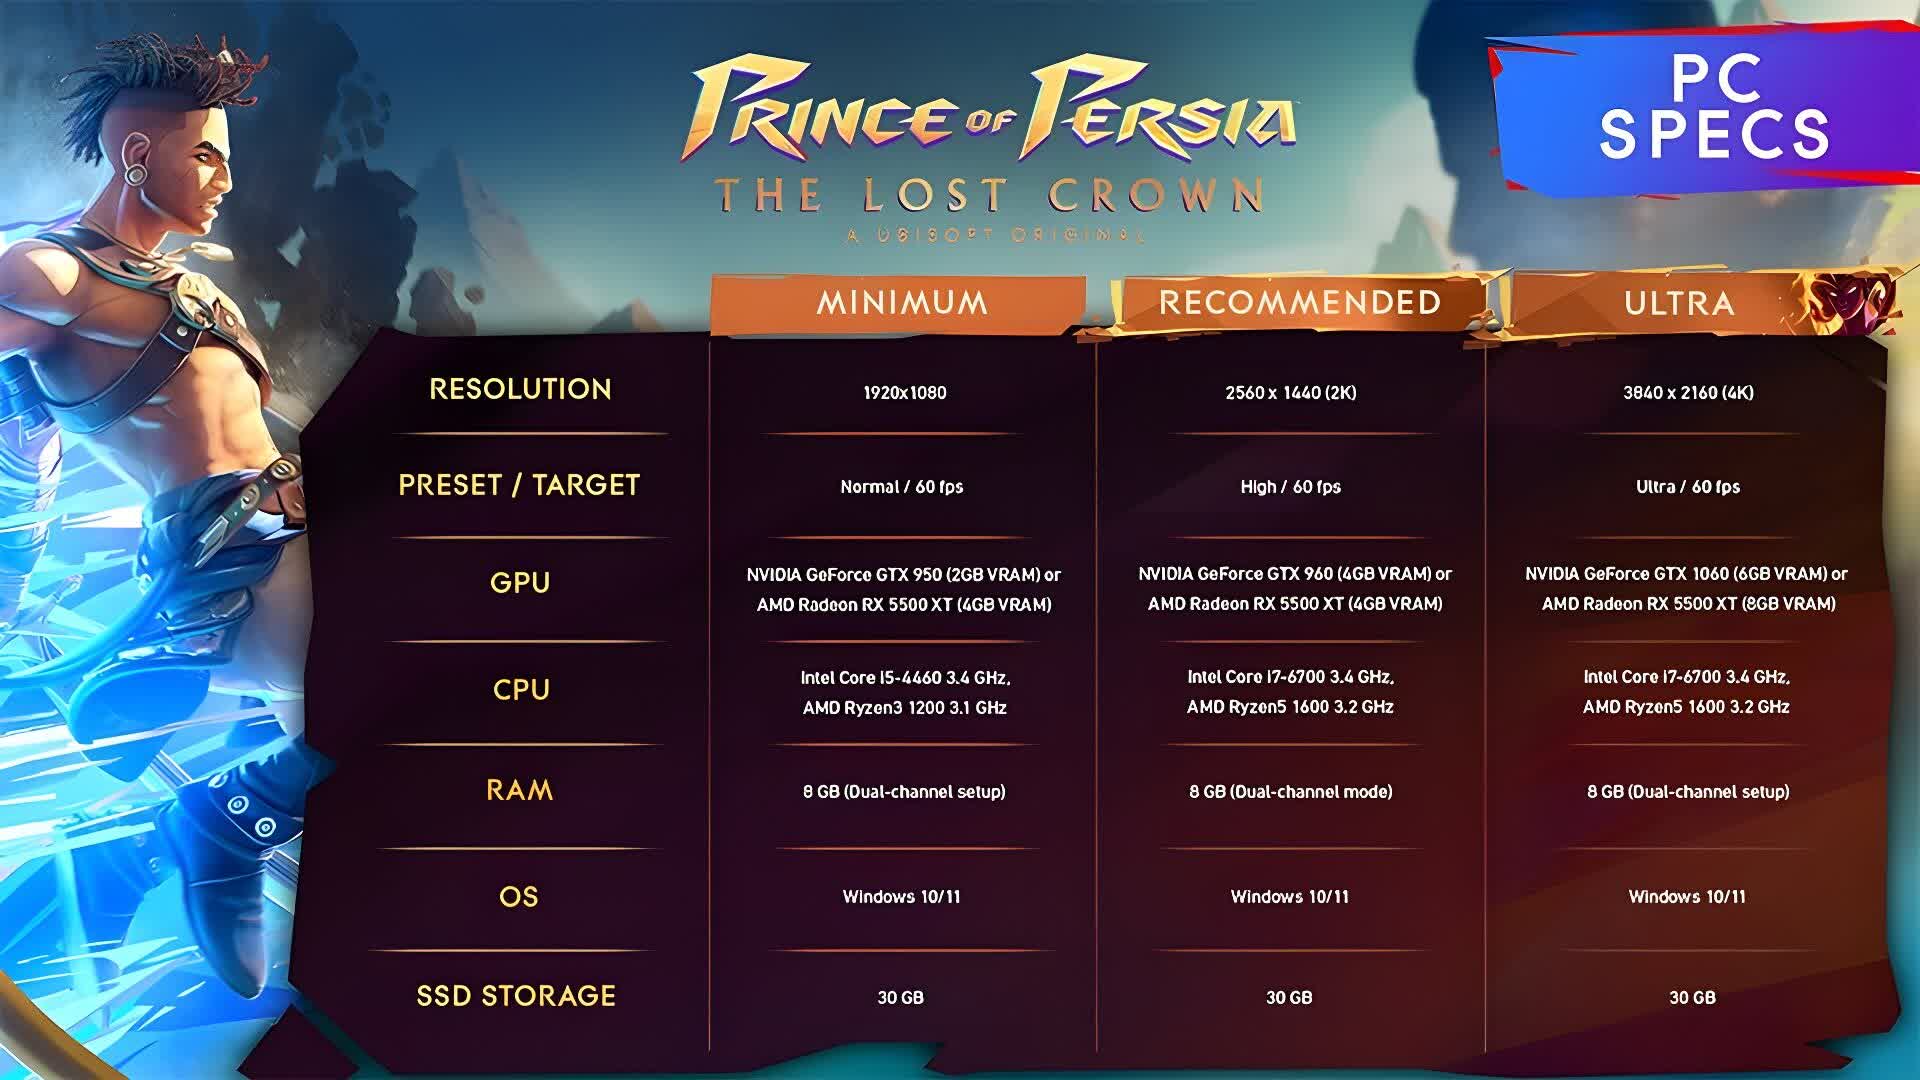 Prince of Persia: The Lost Crown PC specs revealed: 4K@60fps with a GTX 1060!